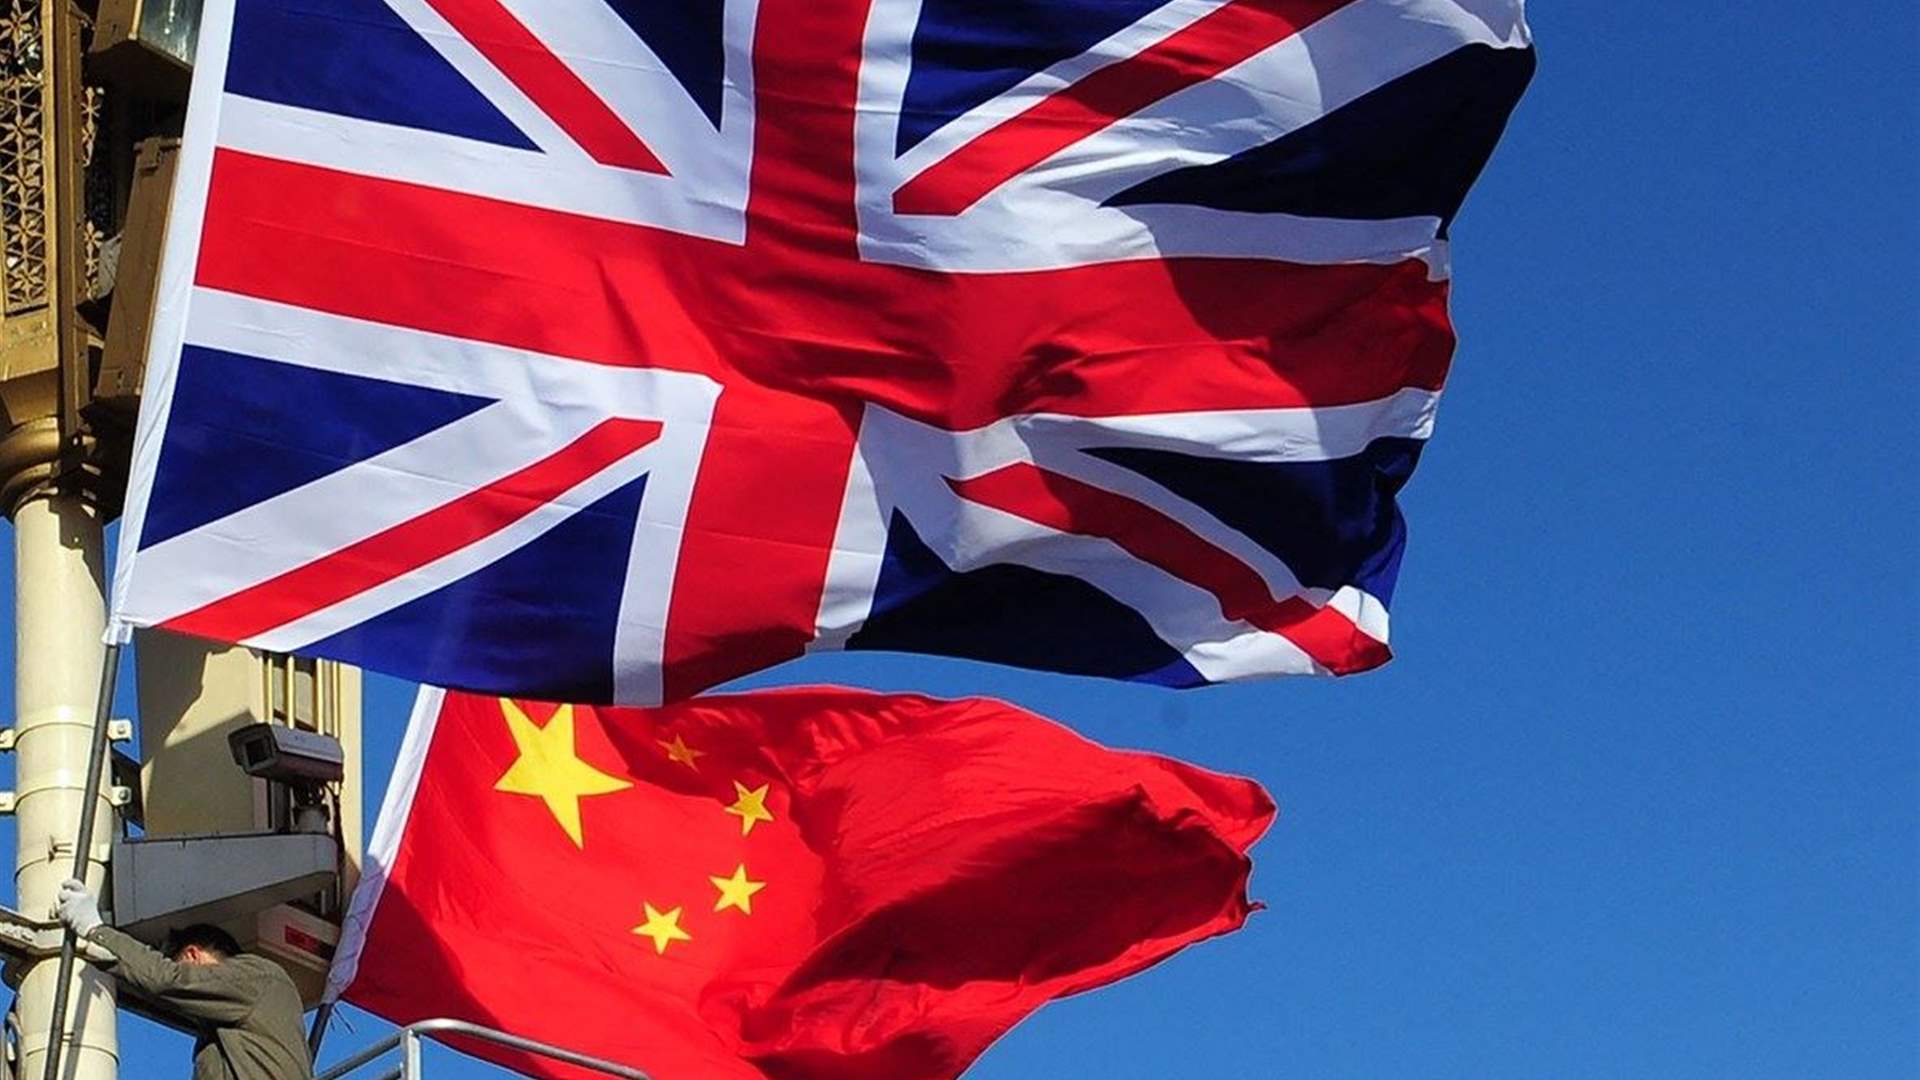 UK parliament researcher arrested over China spying